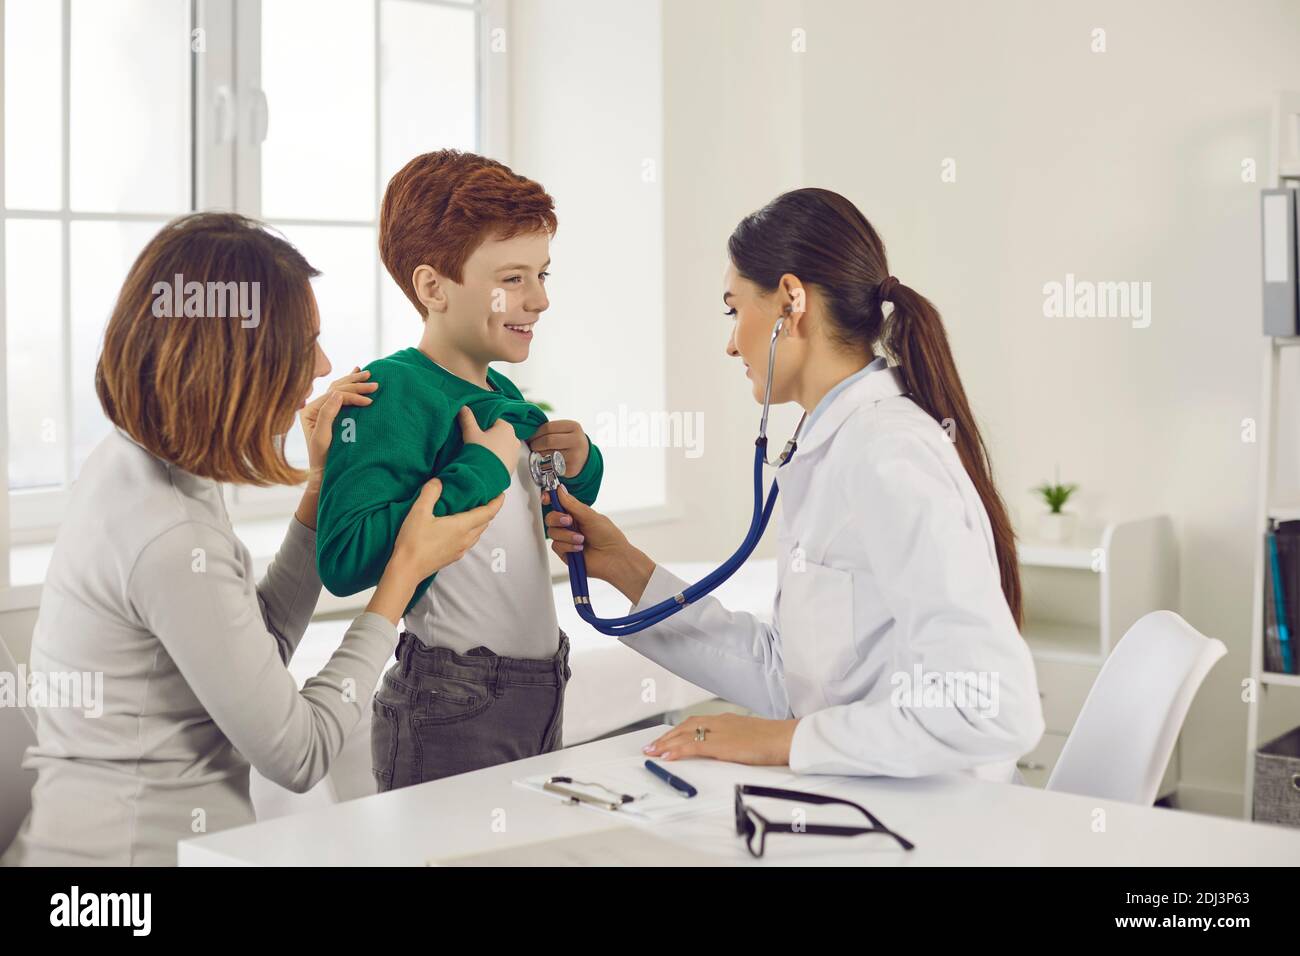 Doctor listens with a stethoscope to a boy who came with his mother for a medical examination. Stock Photo